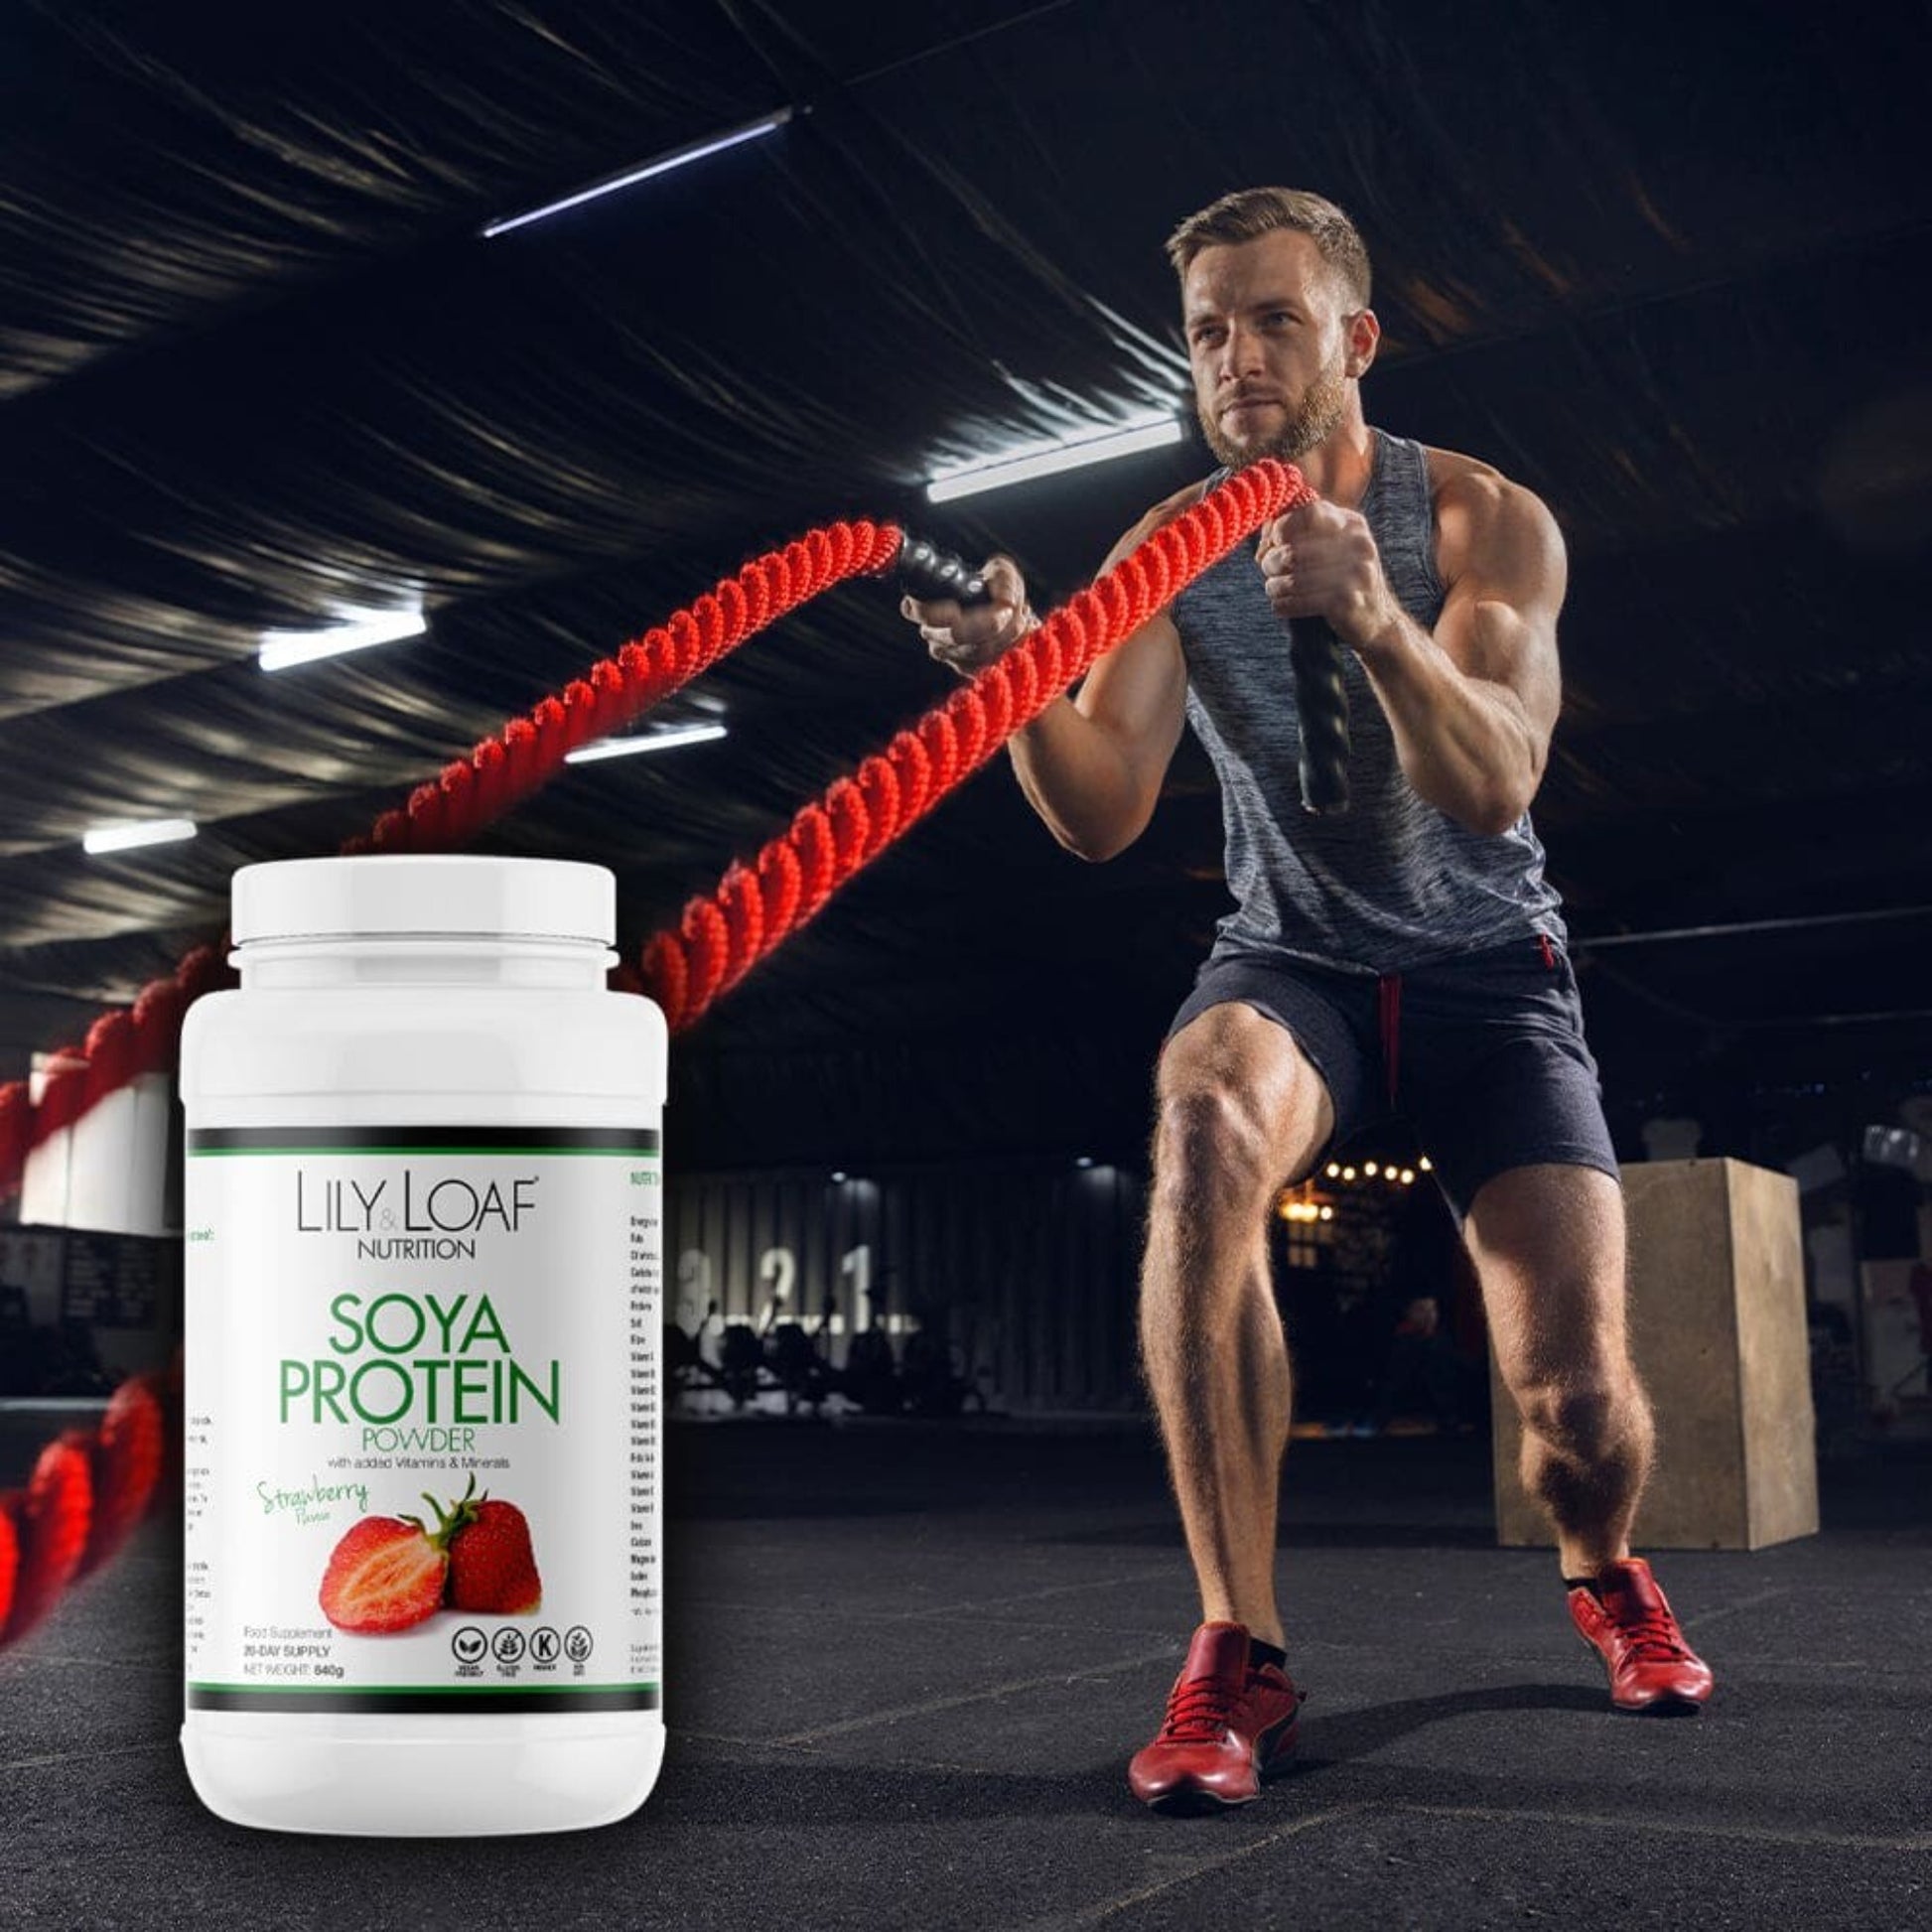 An action-packed image showcasing a fit man engaged in an intense workout with battle ropes, paired with a container of Lily & Loaf Soya Protein Powder, suggesting the product's role in supporting an active and healthy lifestyle.